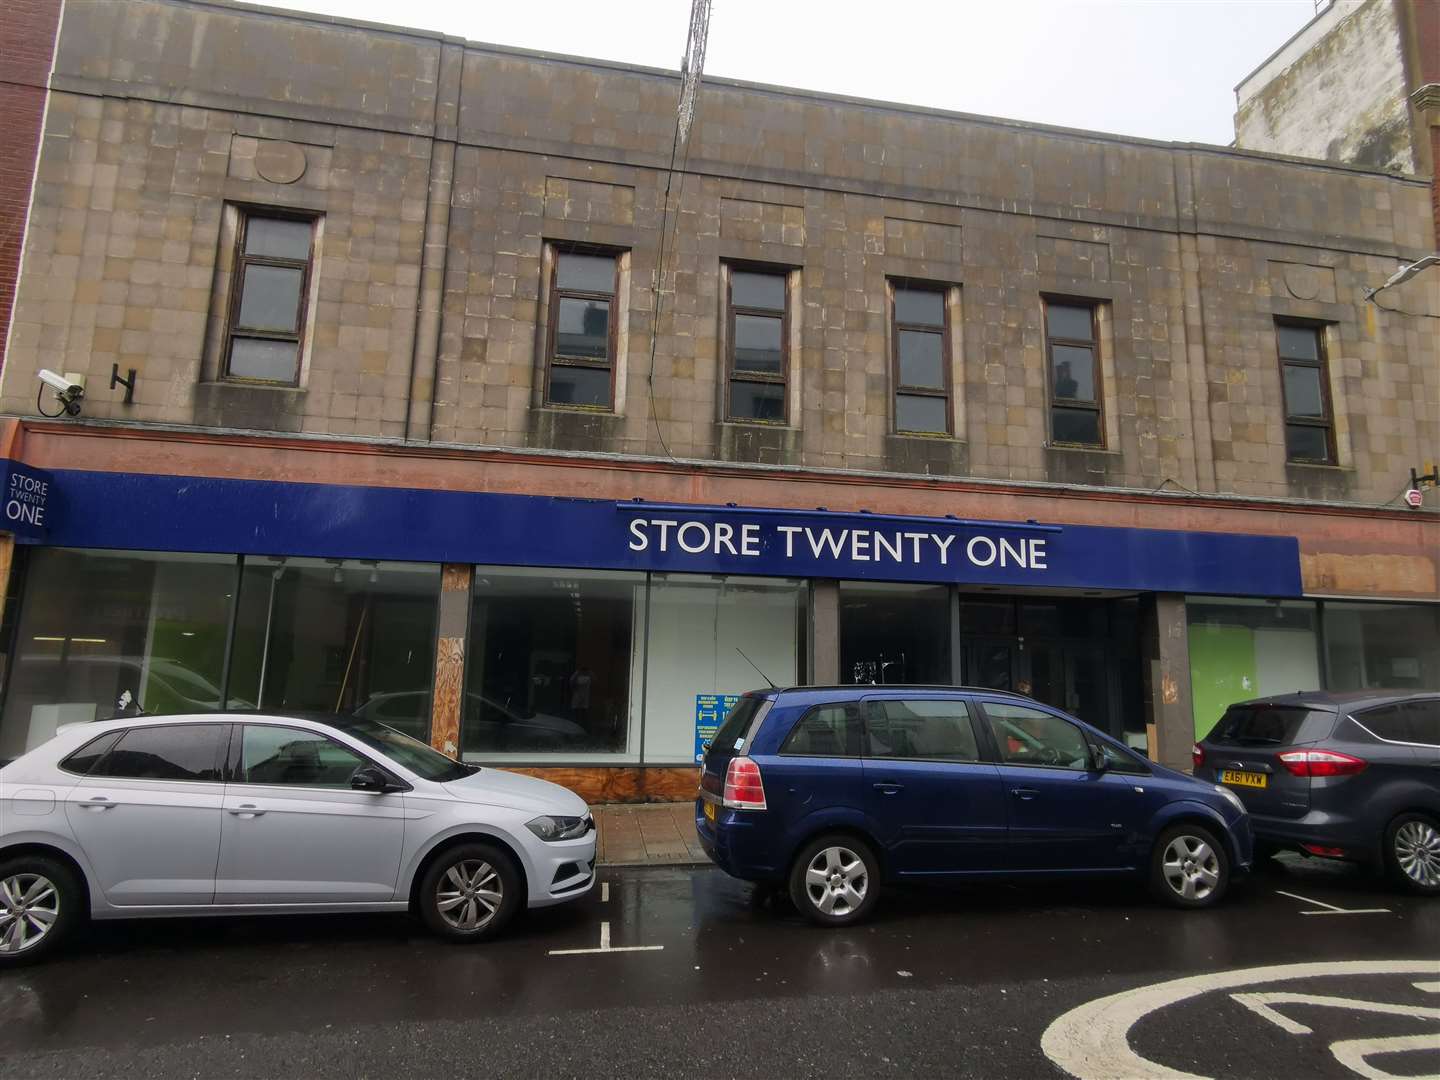 The building was M&S and then Store 21